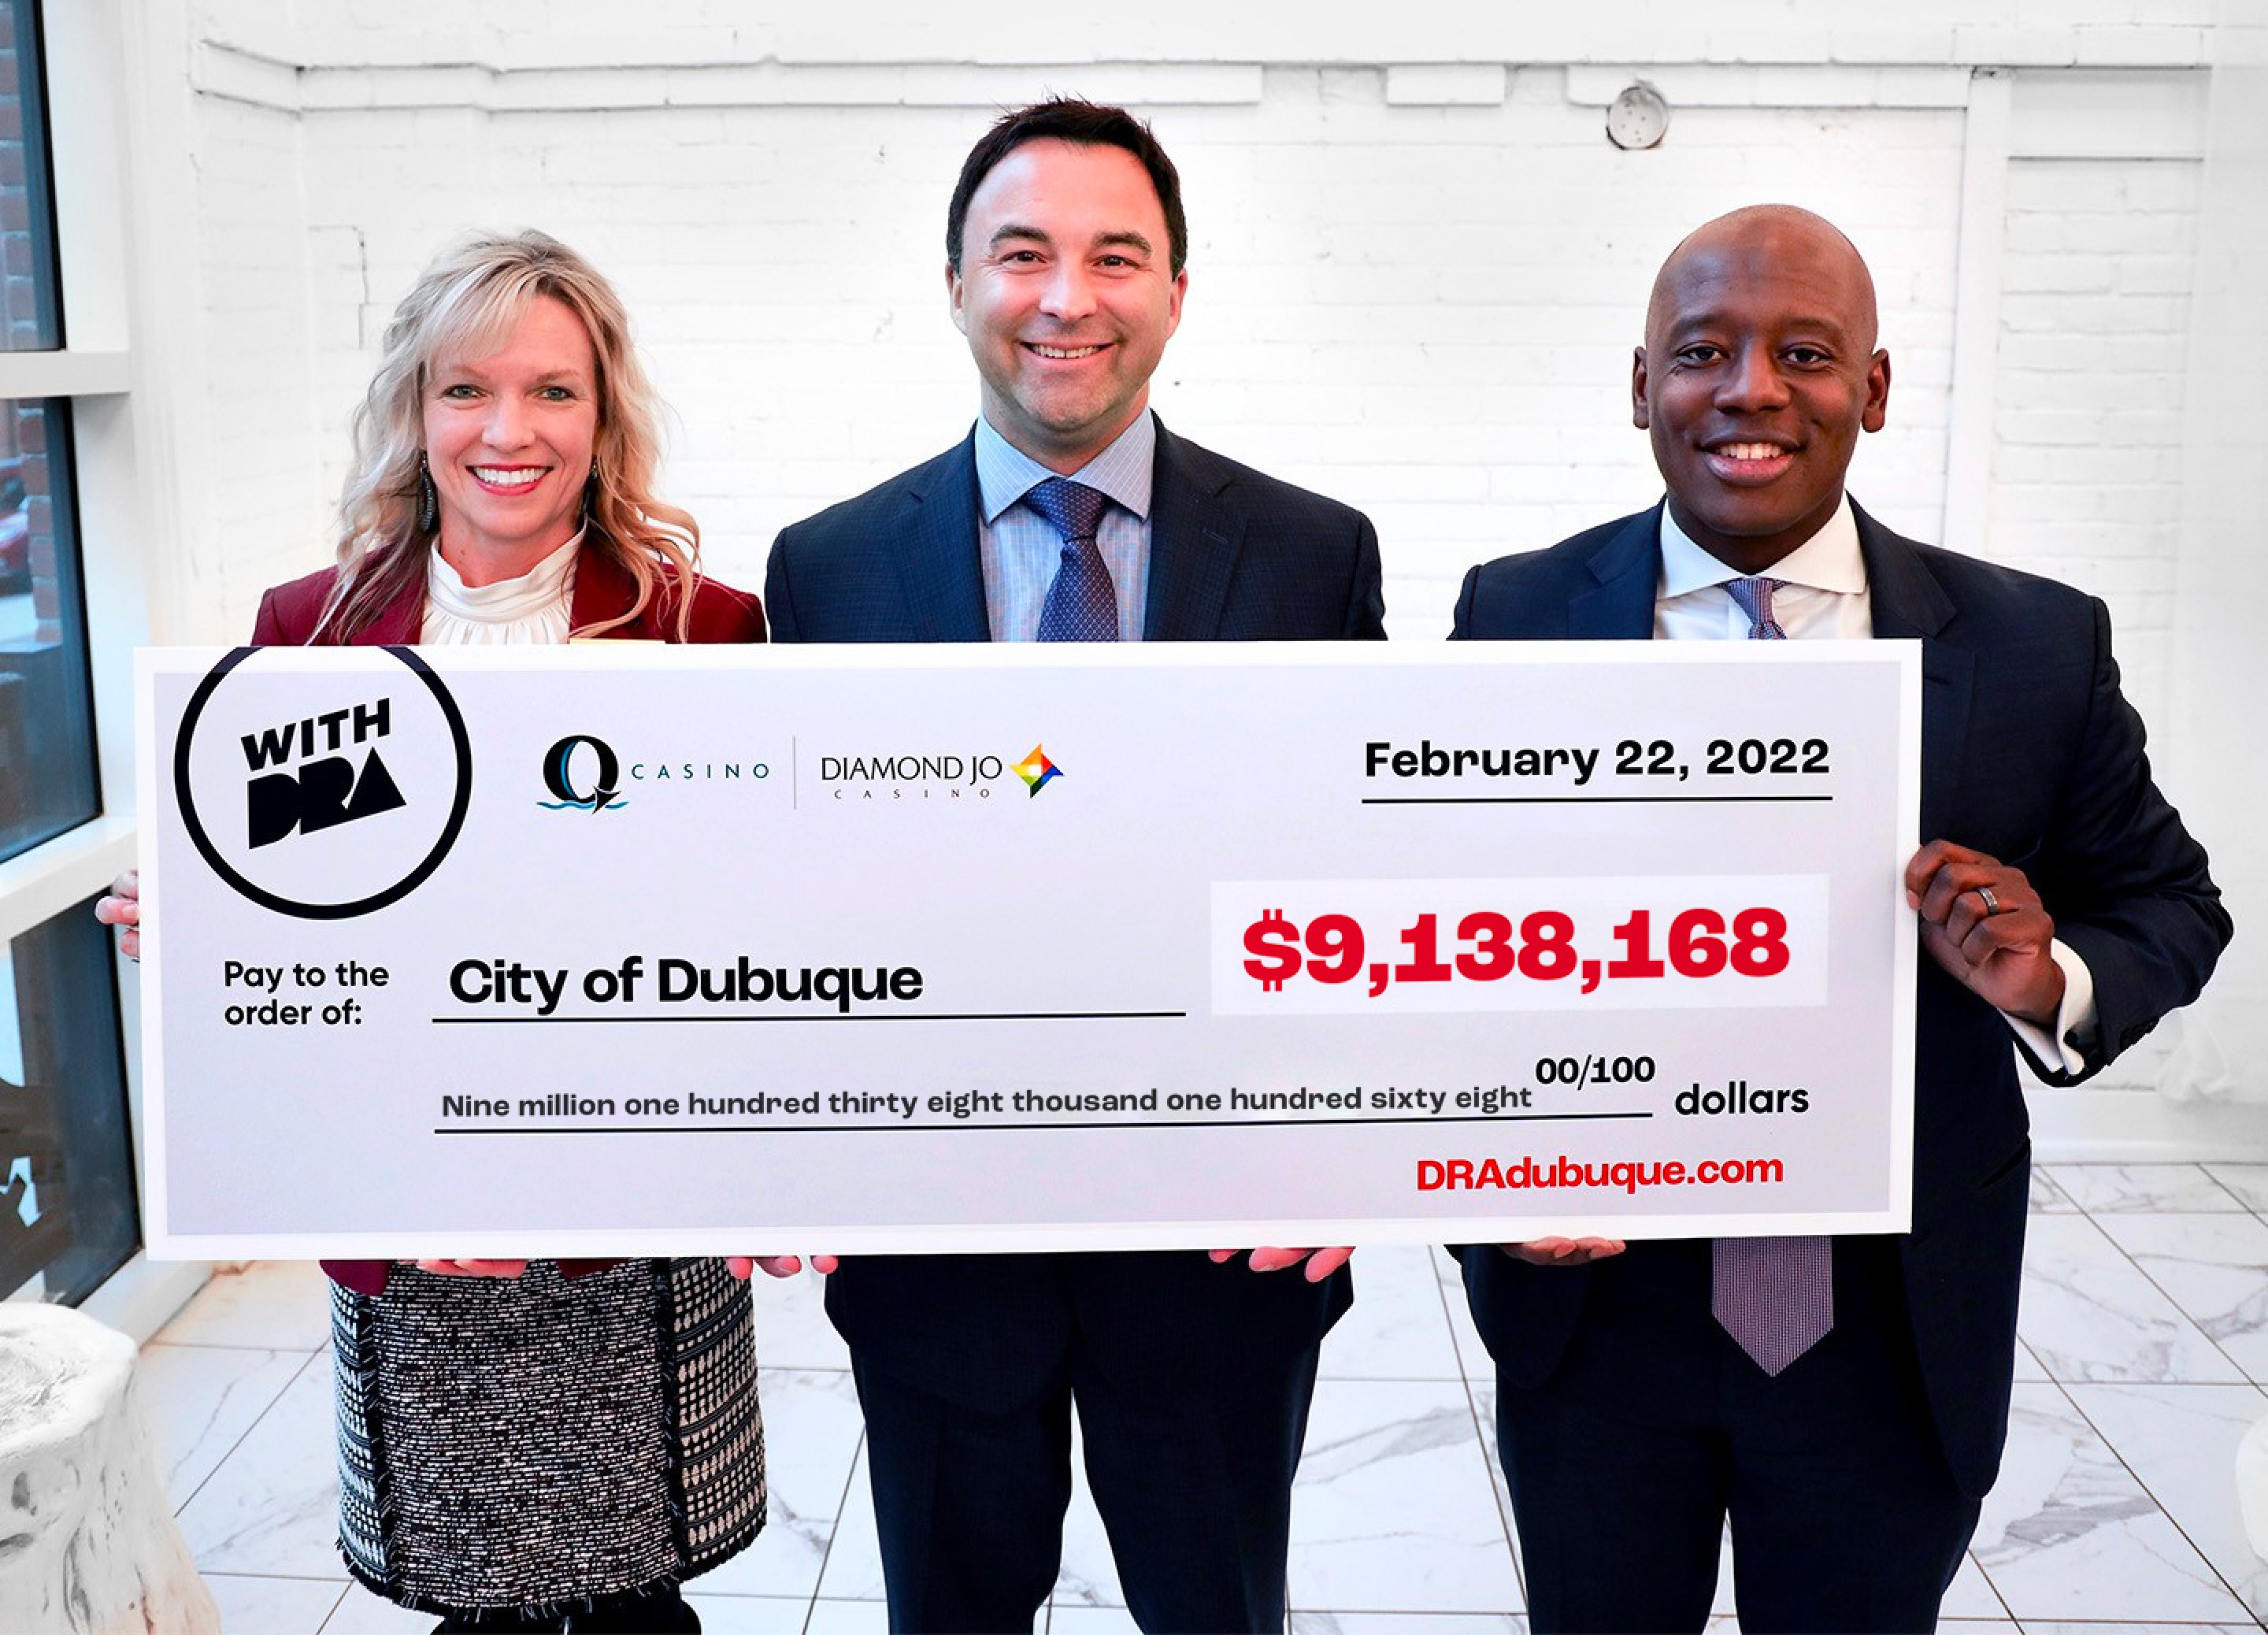 City of Dubuque and the DRA team holding a check